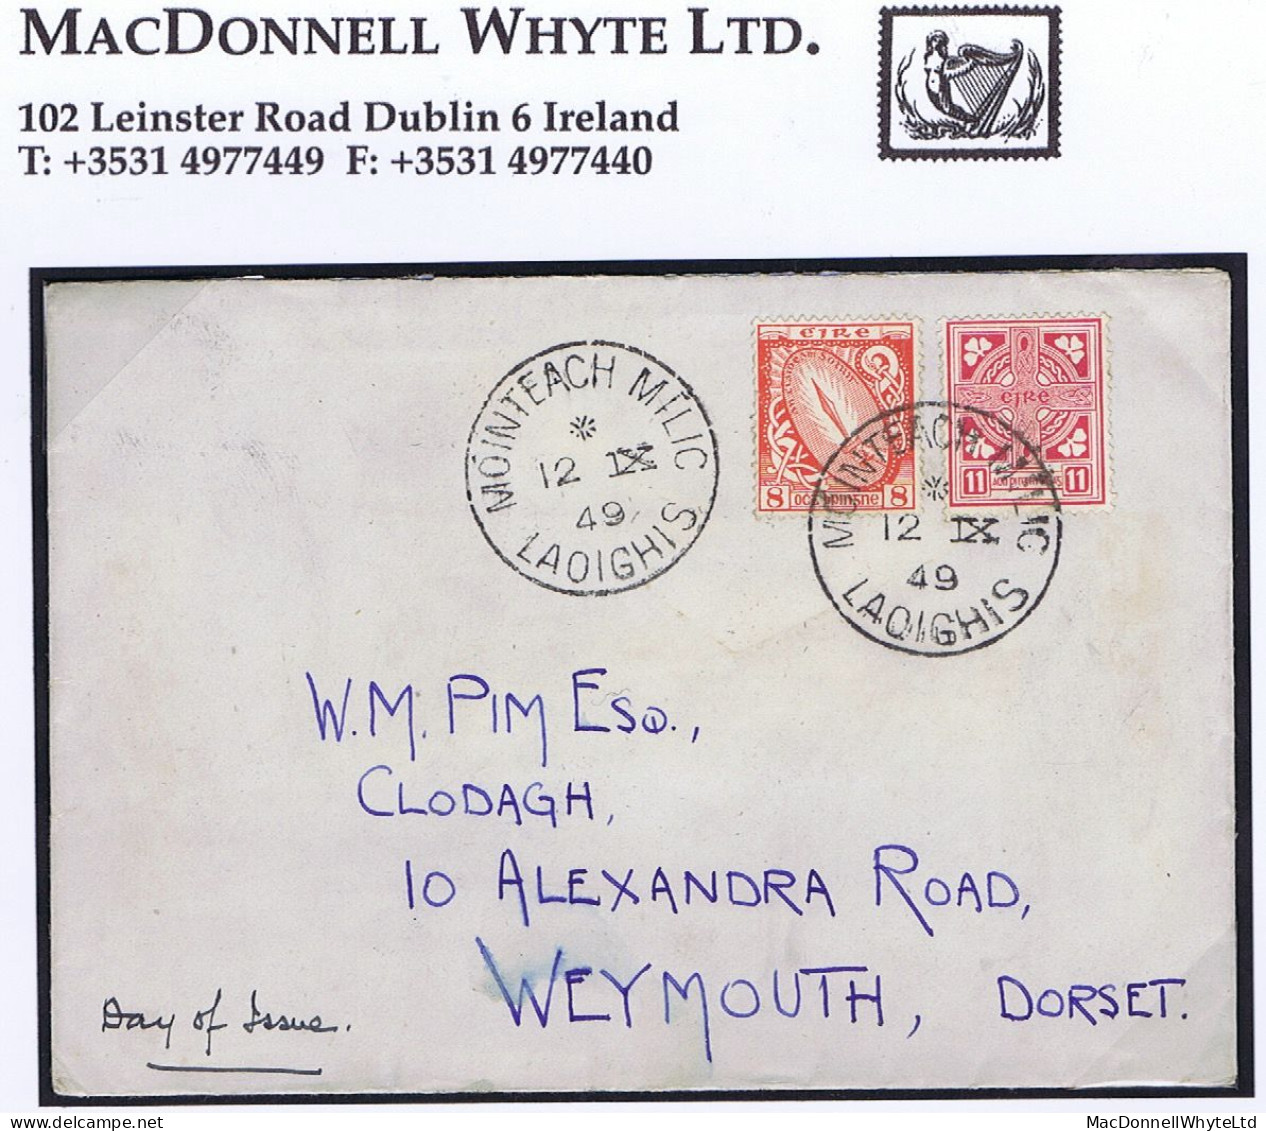 Ireland 1949 E Wmk Definitives 8d And 11d On Plain First Day Cover, Neat Mountmellick Cds MOINTEACH MILIC 12 IX 49 - FDC